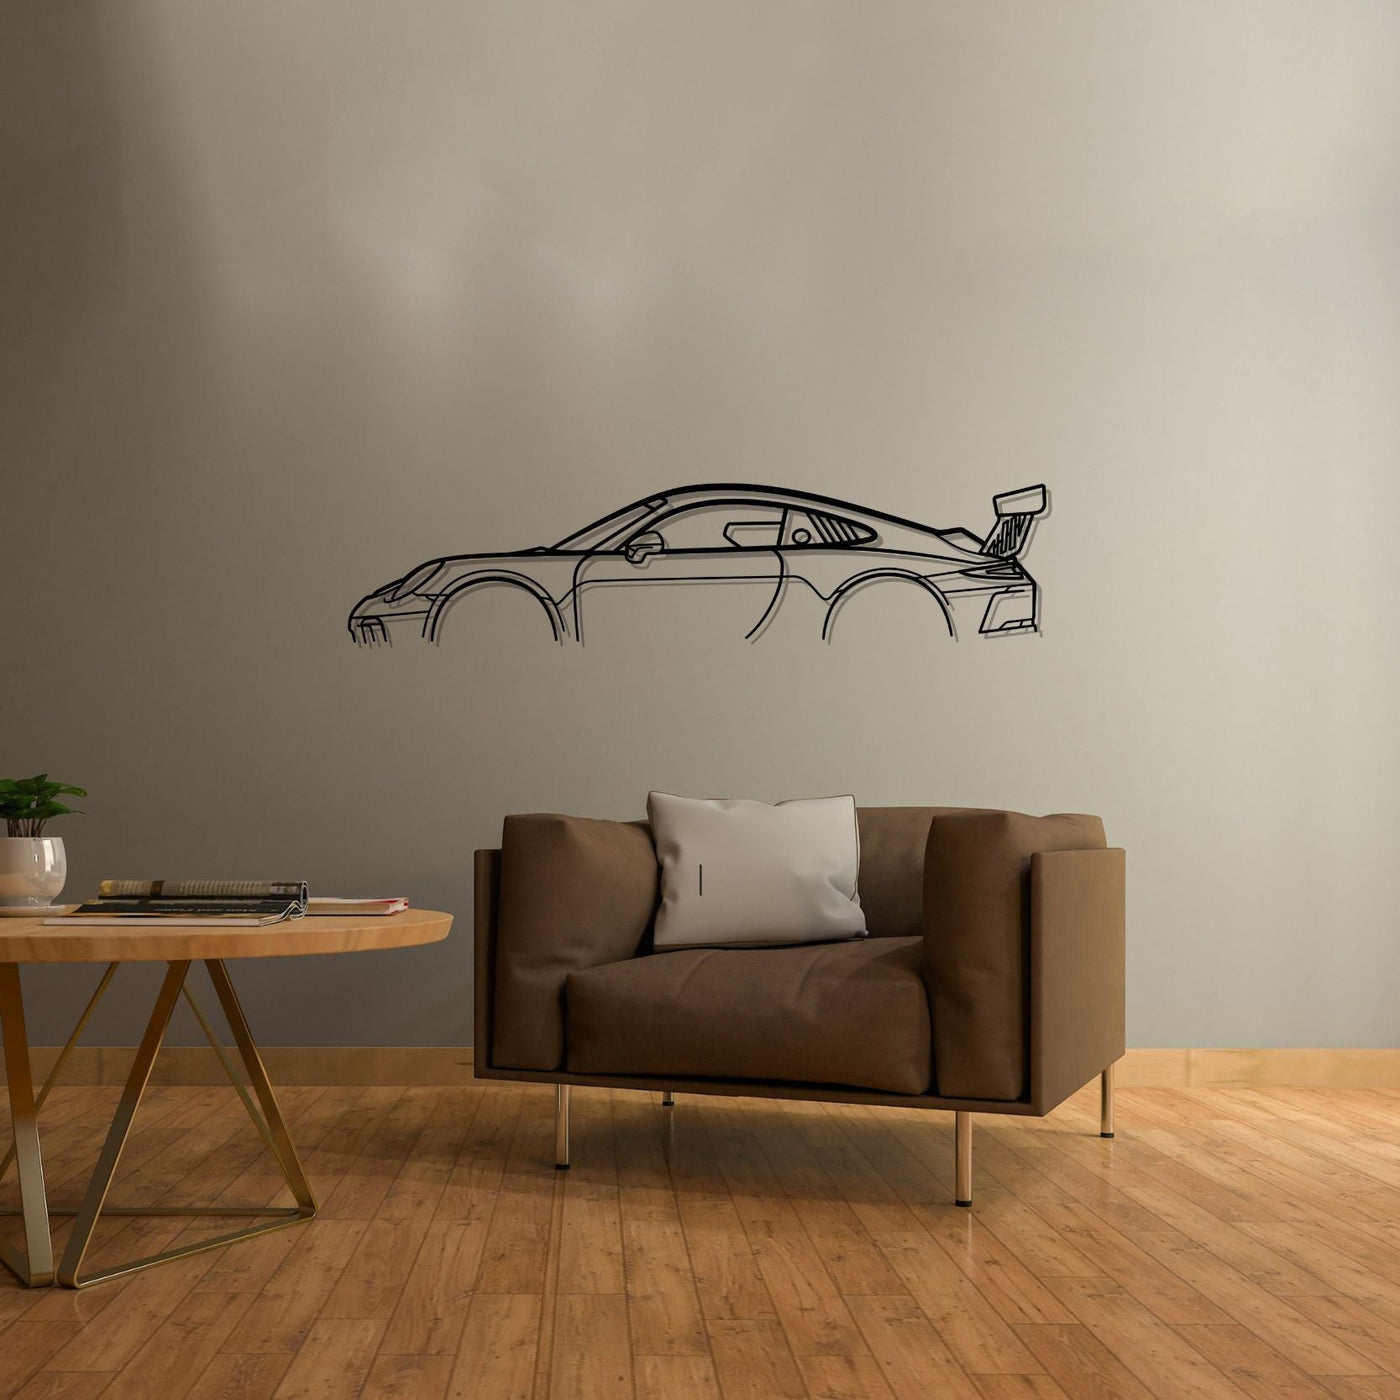 911 Cup model 991 Classic Silhouette Metal Wall Art